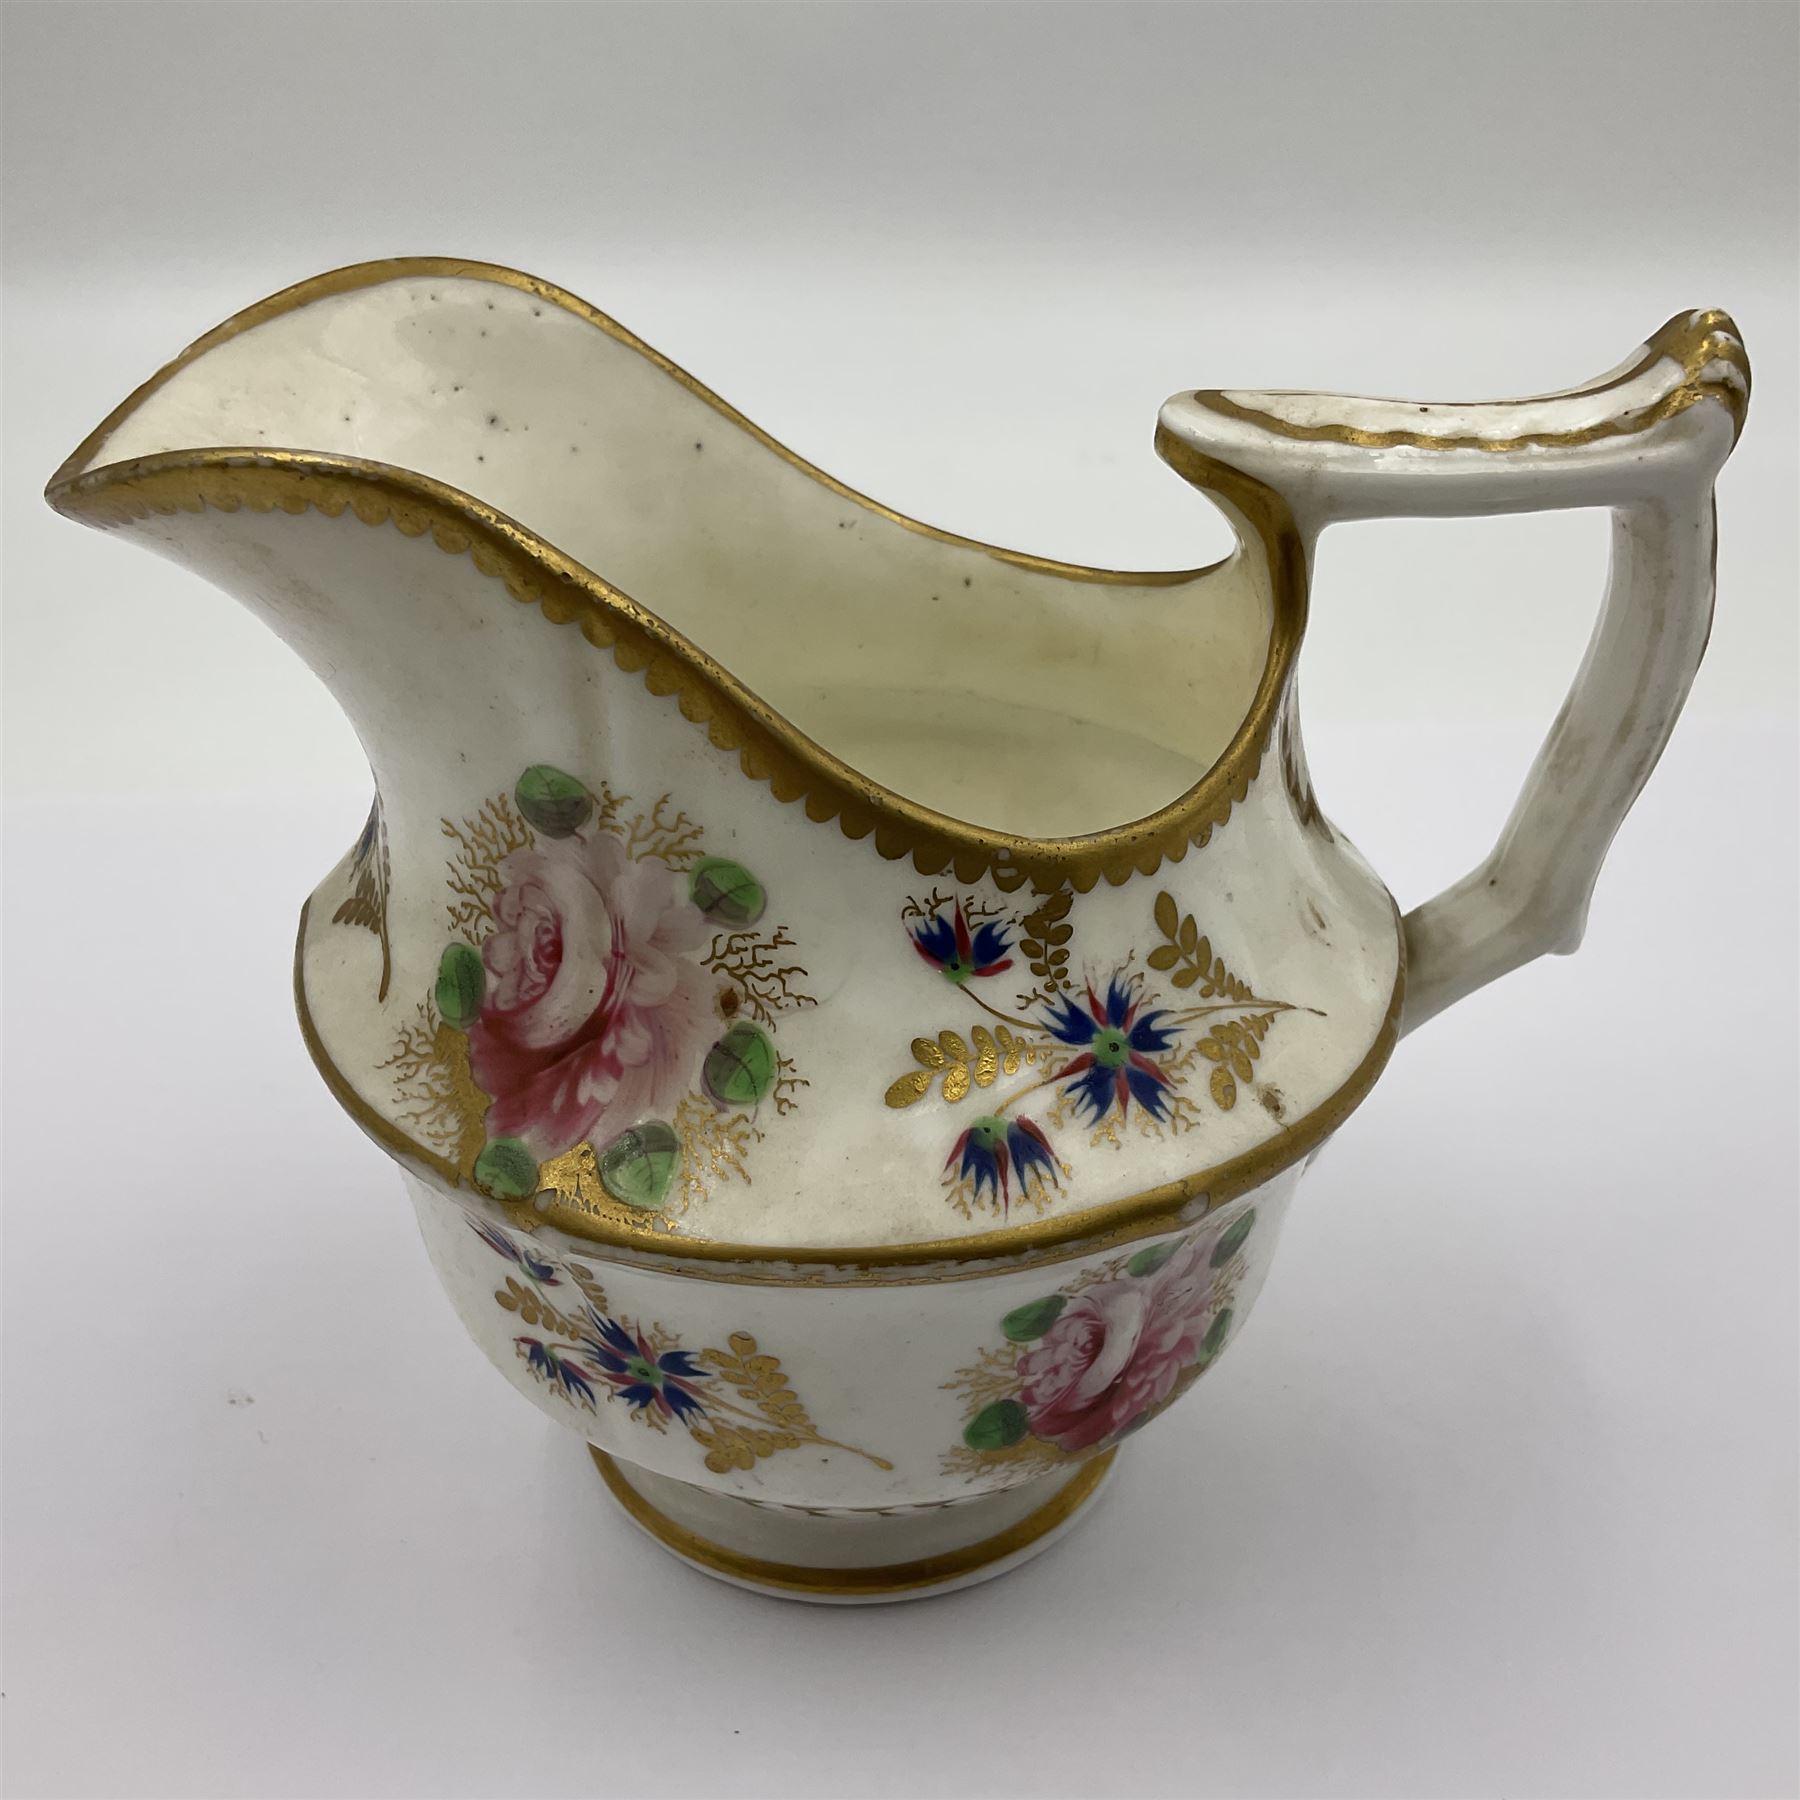 19th century Thomas Goode and Co jug - Image 17 of 22